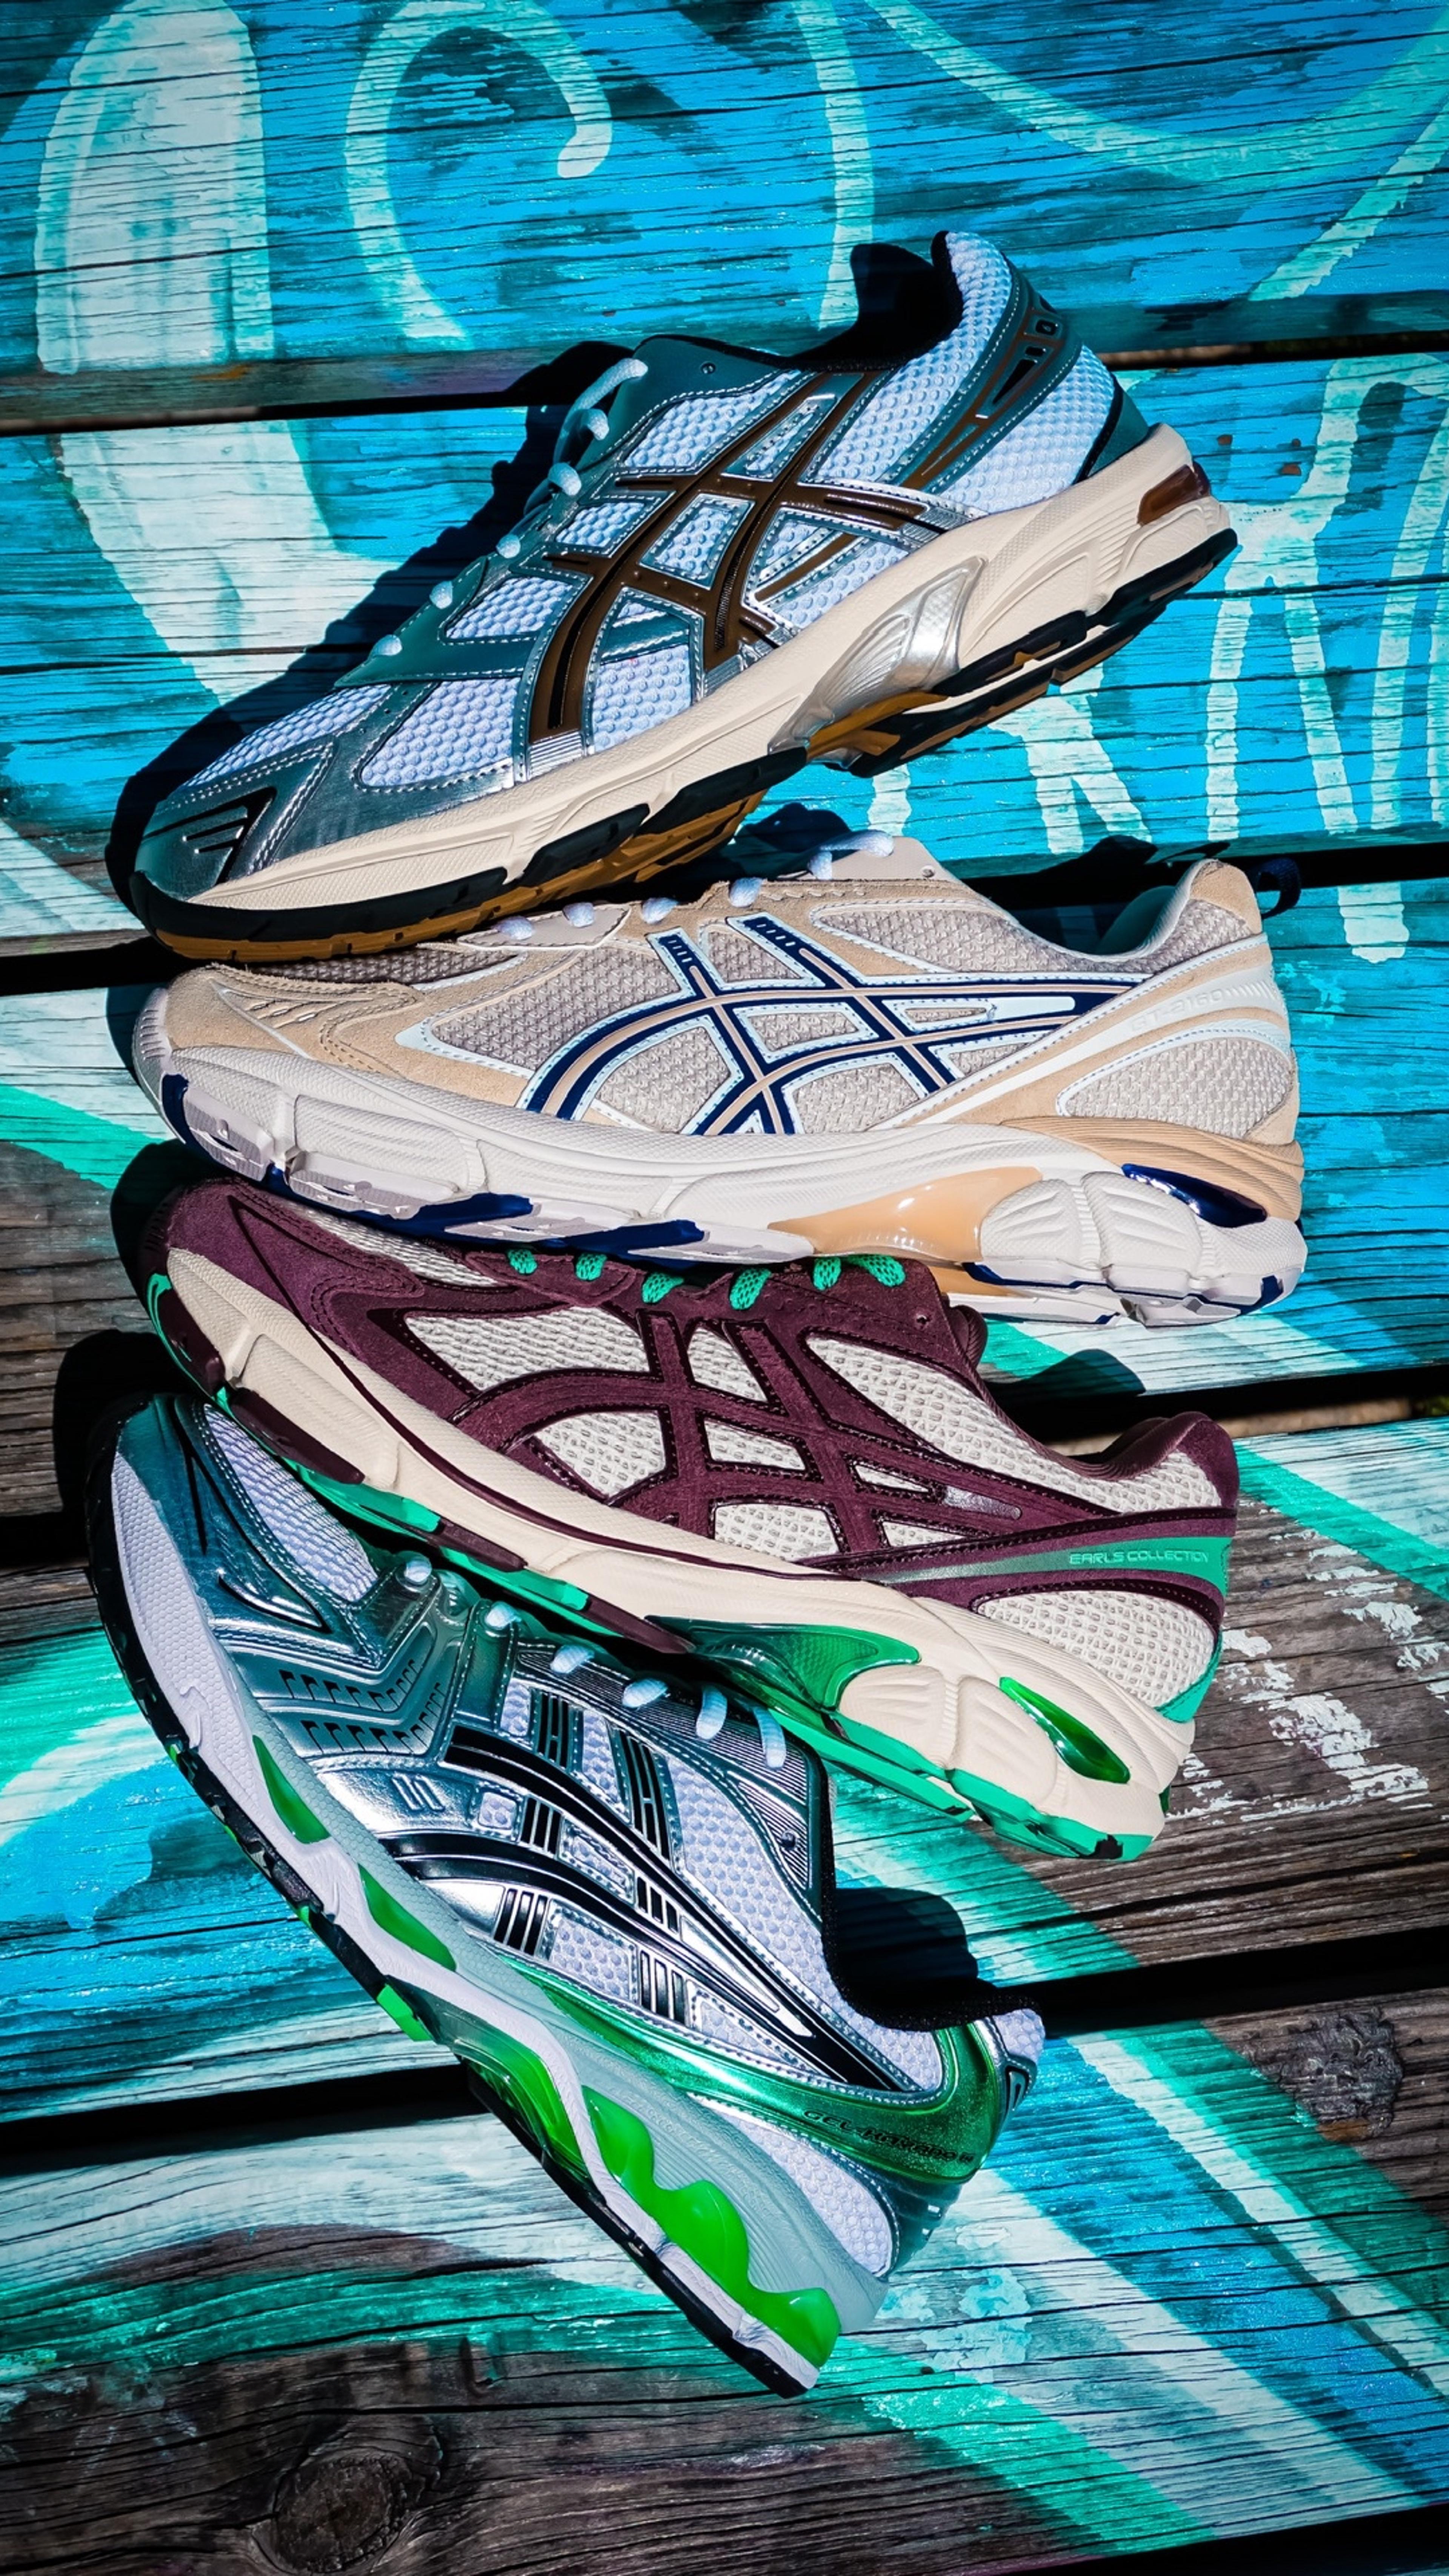 Preview image for the show titled "Asics" at Today @ 8:00 PM